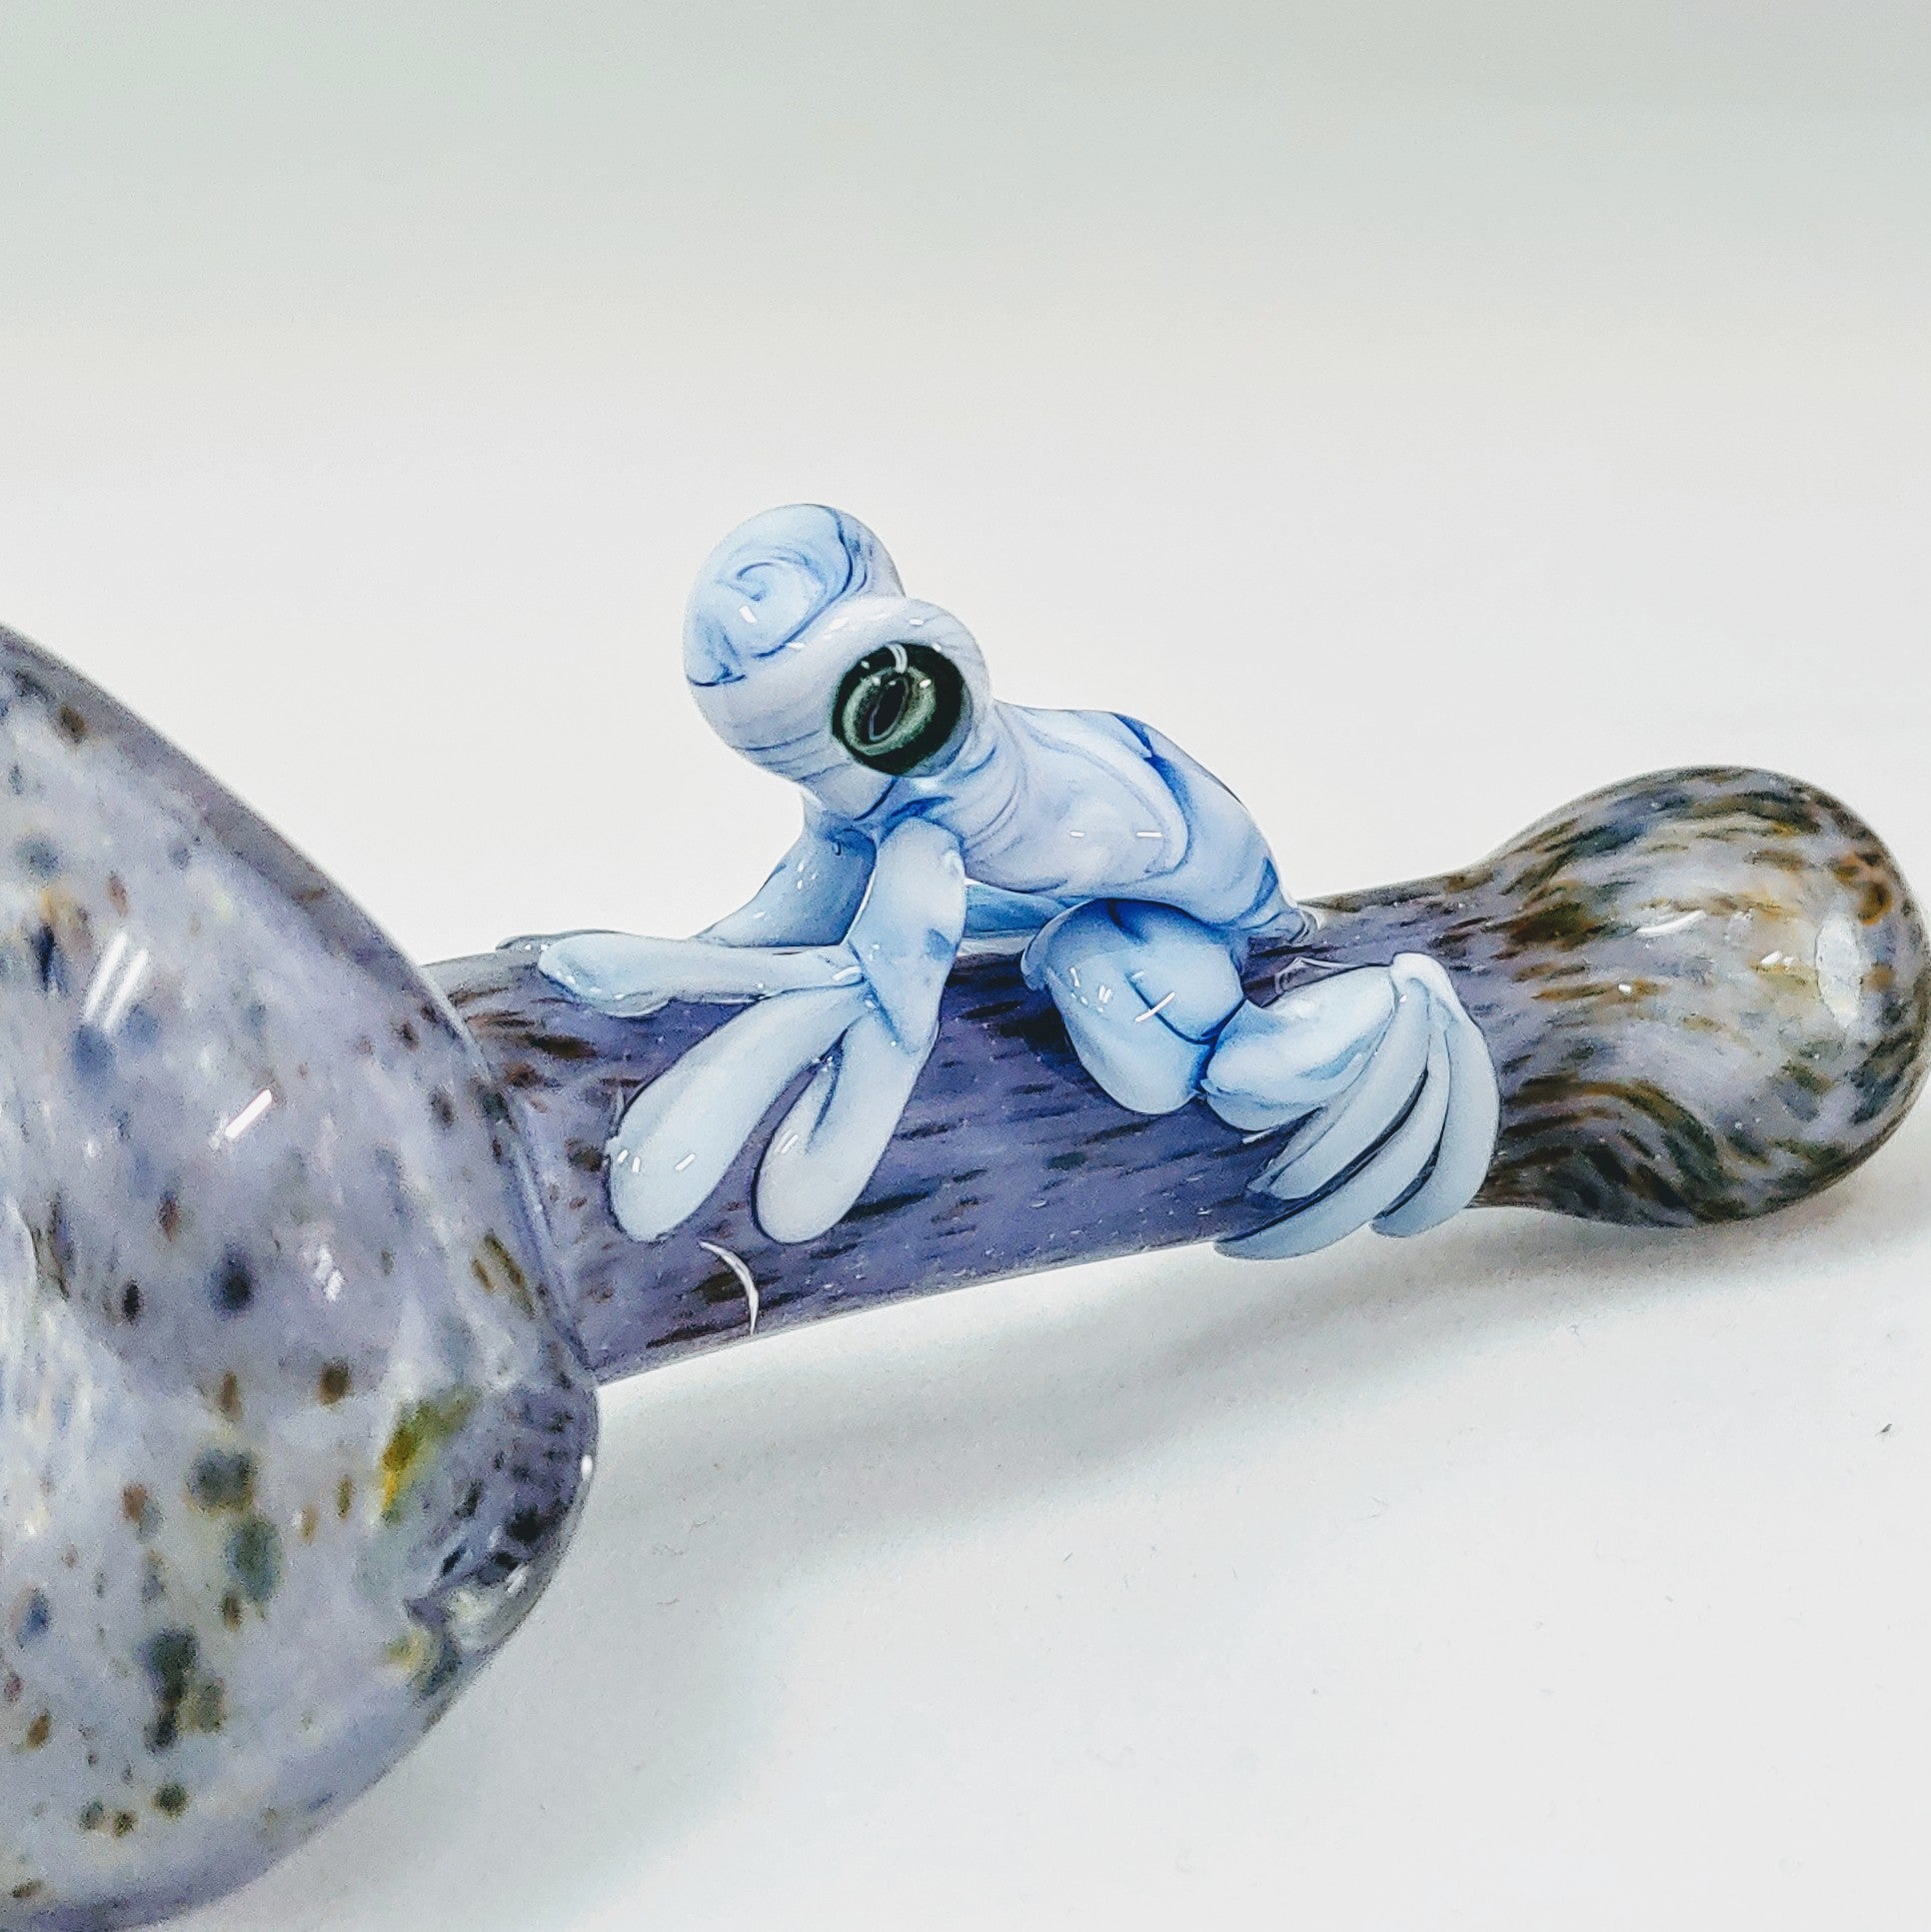 Glass Frog Pipe, Glass Smoking Pipe, Hand Blown Pipe, Glass Pipe